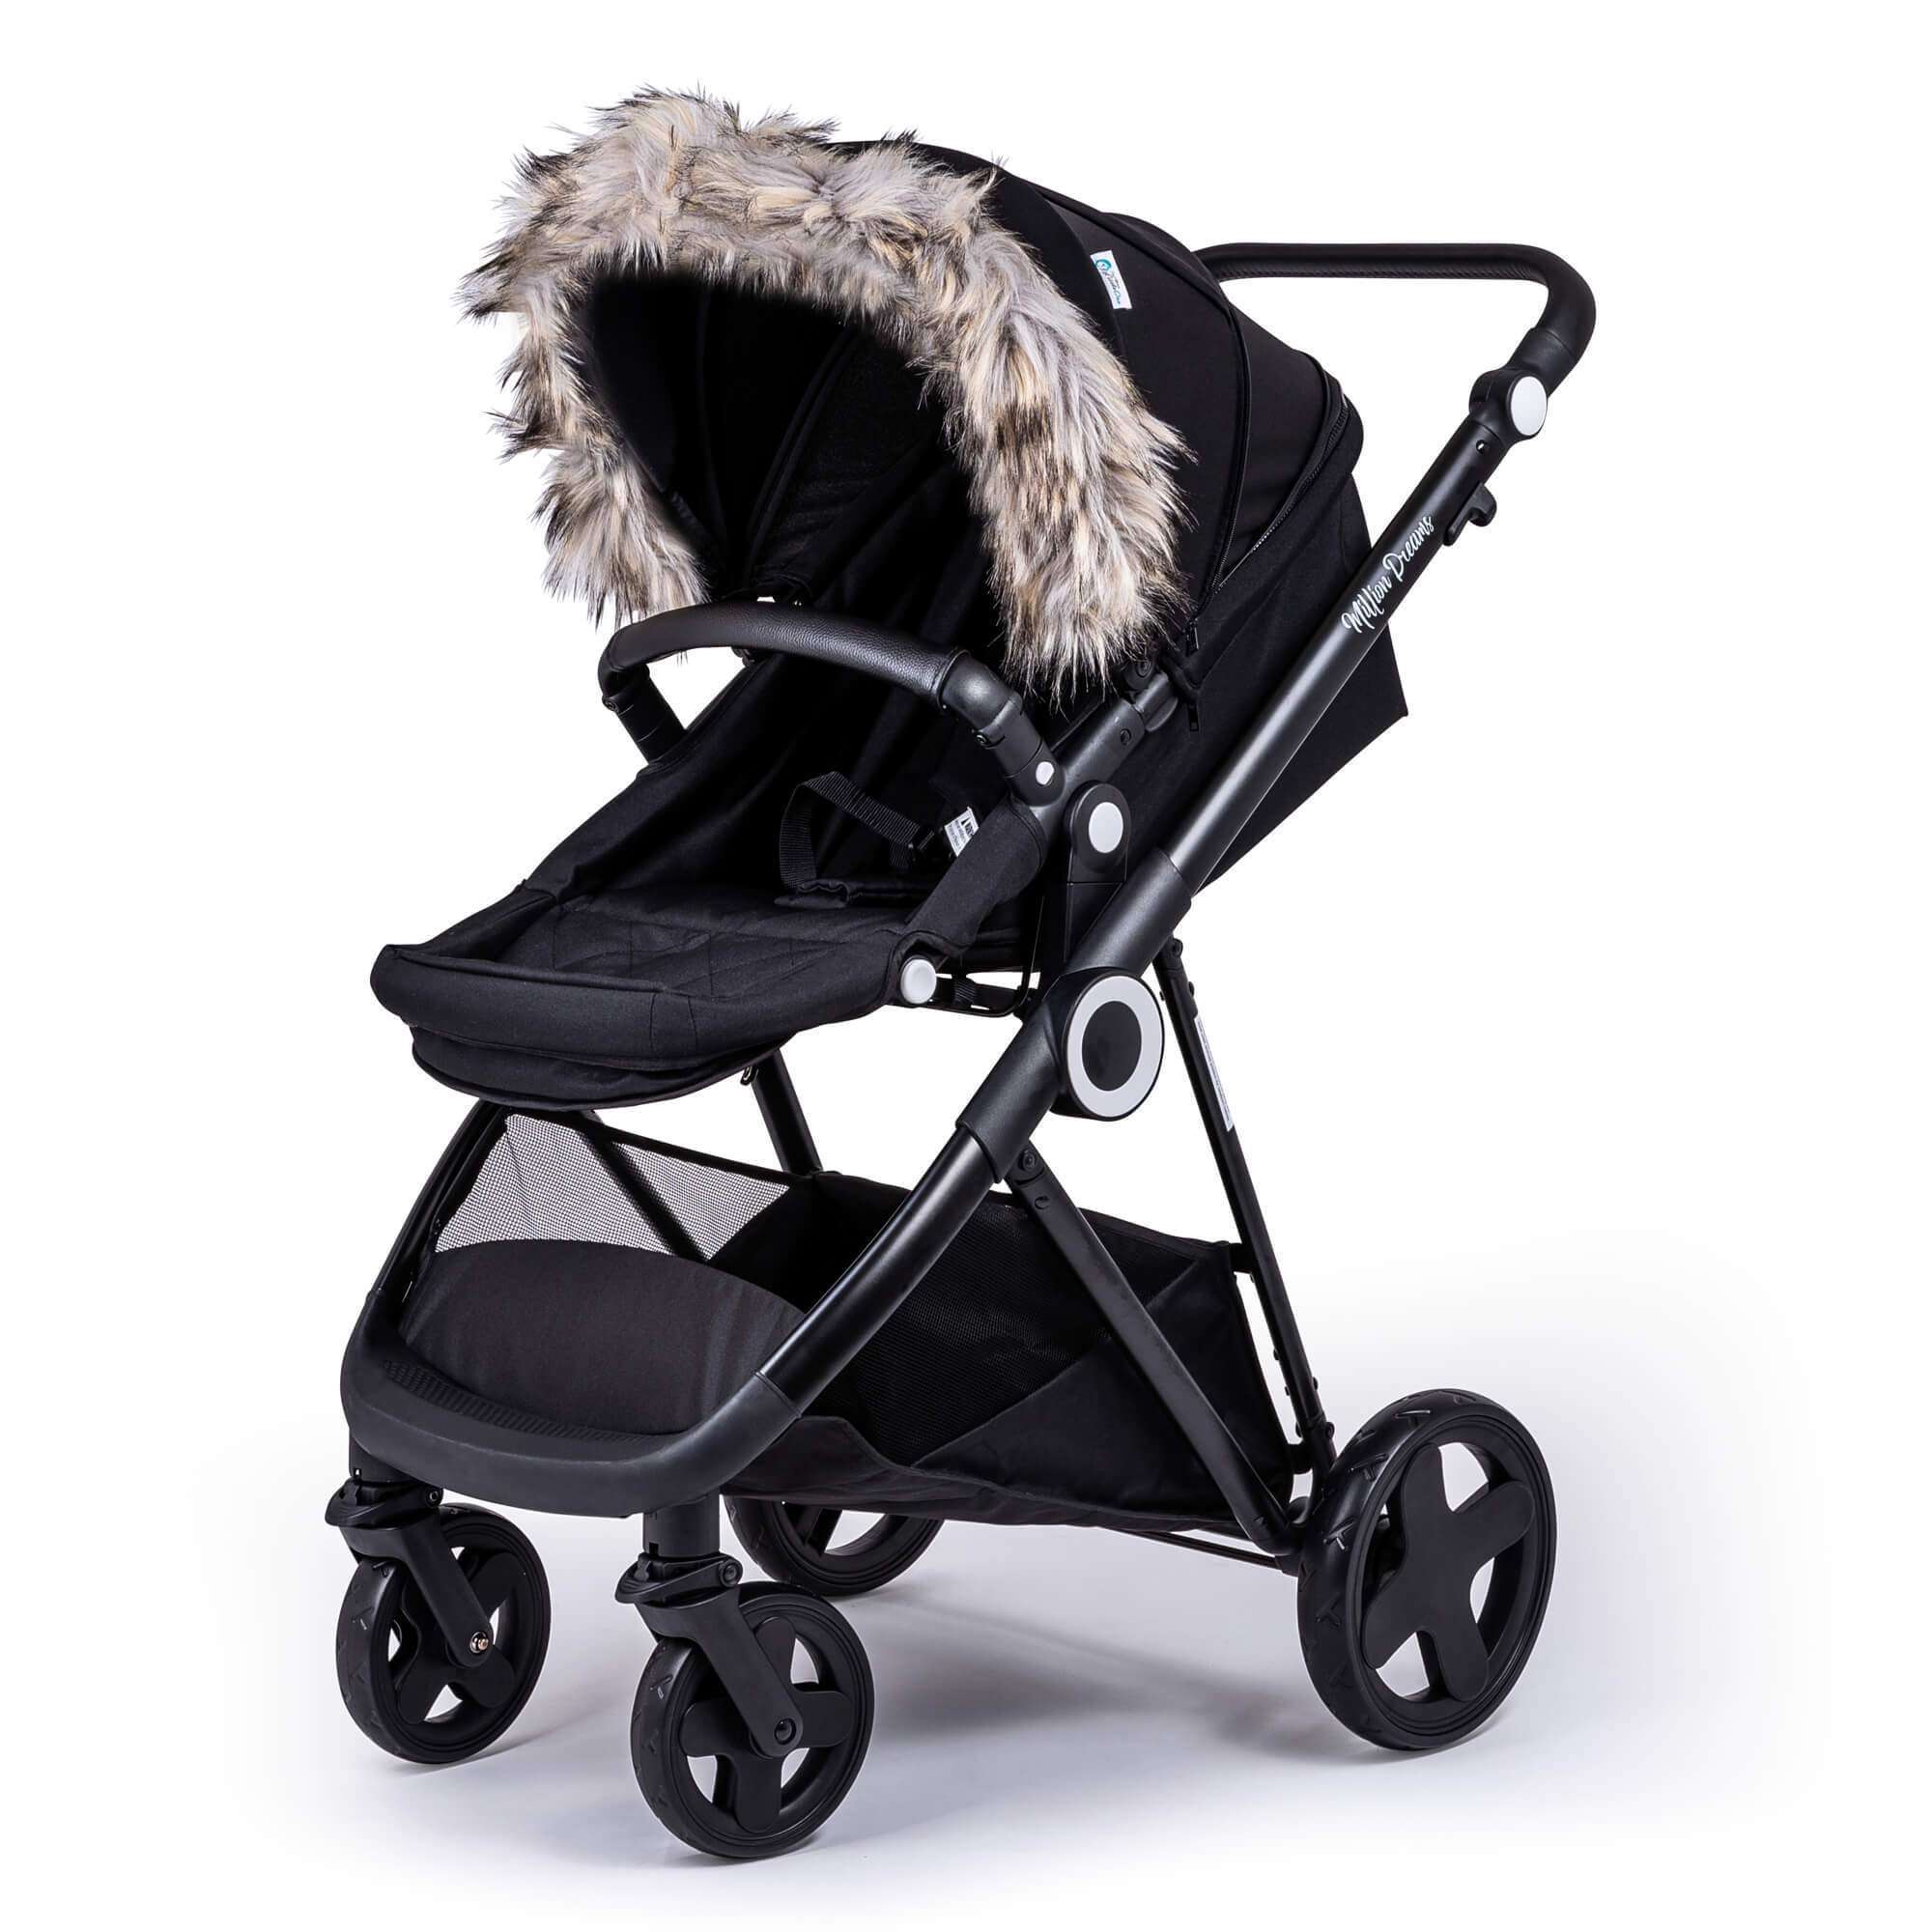 Pram Fur Hood Trim Attachment for Pushchair Compatible with Egg - Light Grey / Fits All Models | For Your Little One